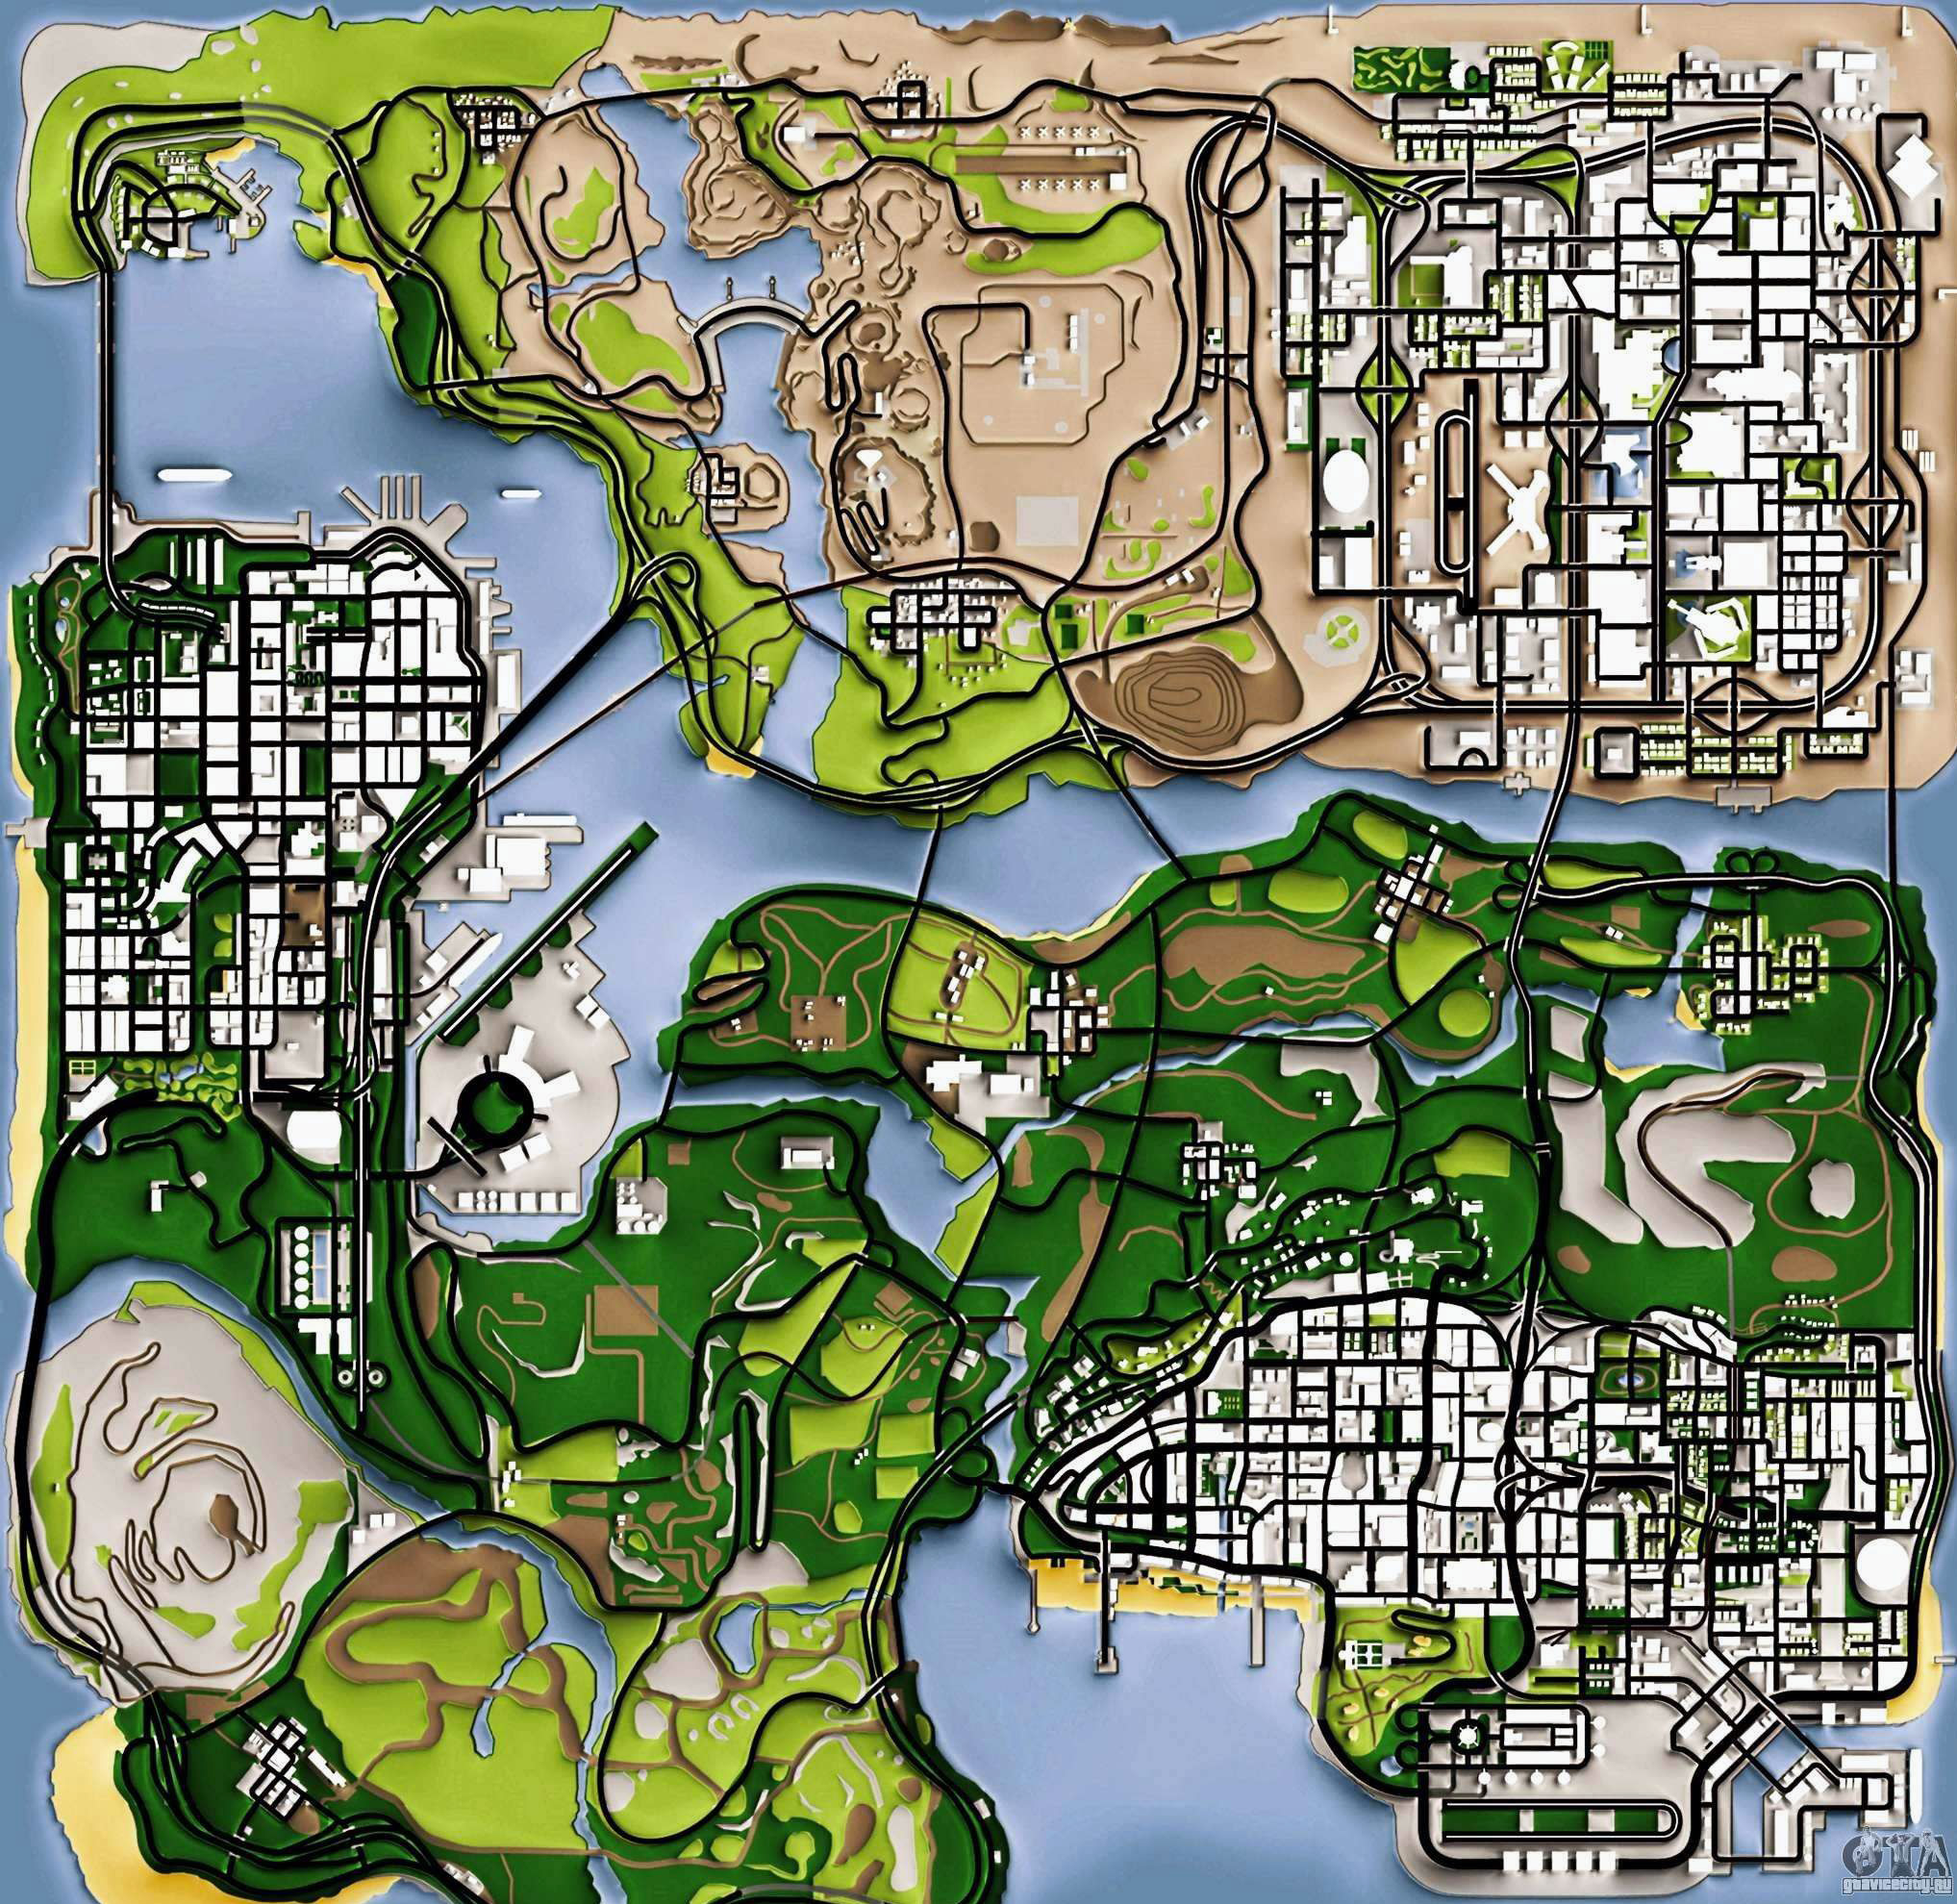 Large Detailed Road Map Of Gta San Andreas Games Mapsland Maps Of The World 9225